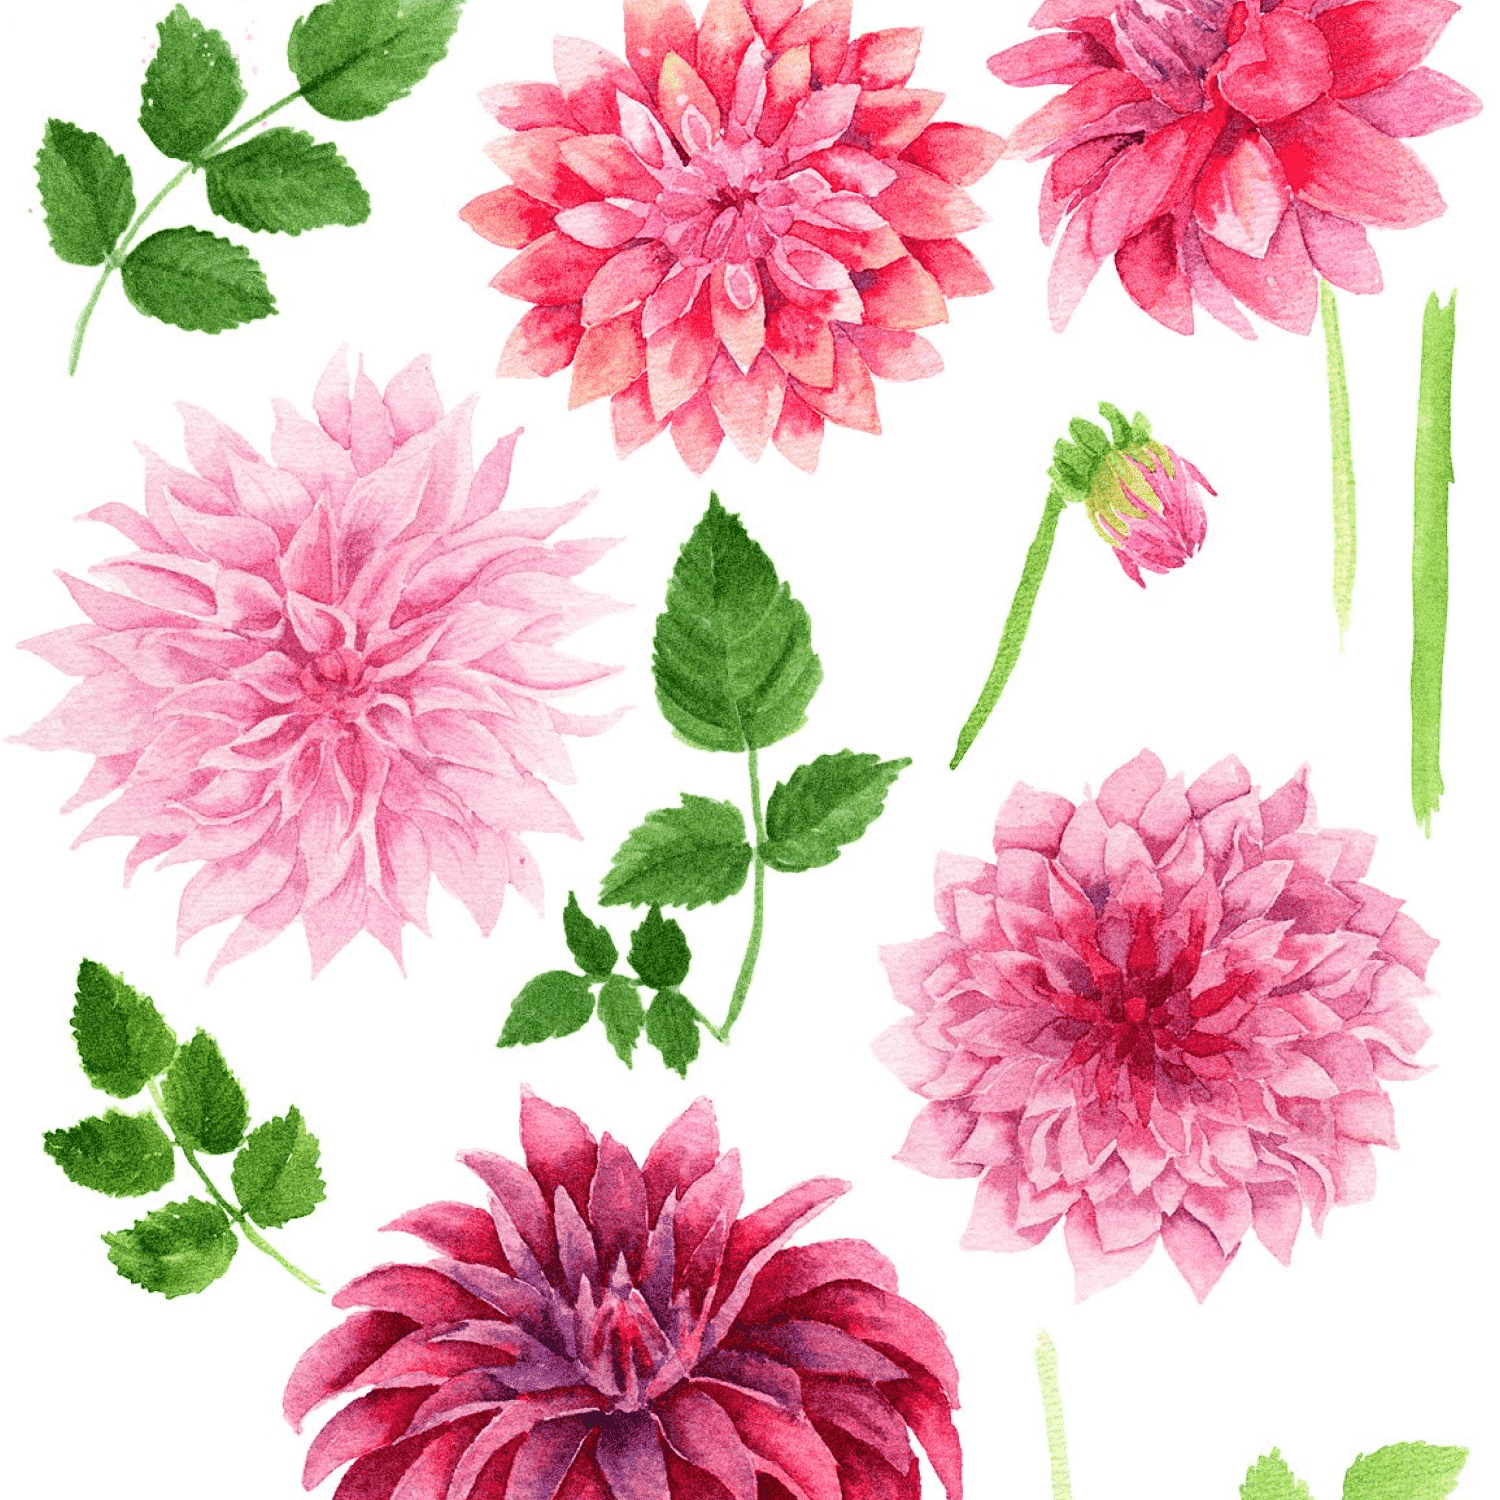 Watercolor Dahlias - Hand Painted Blooms And Textures - "Hand Drawed Flowers On Background".